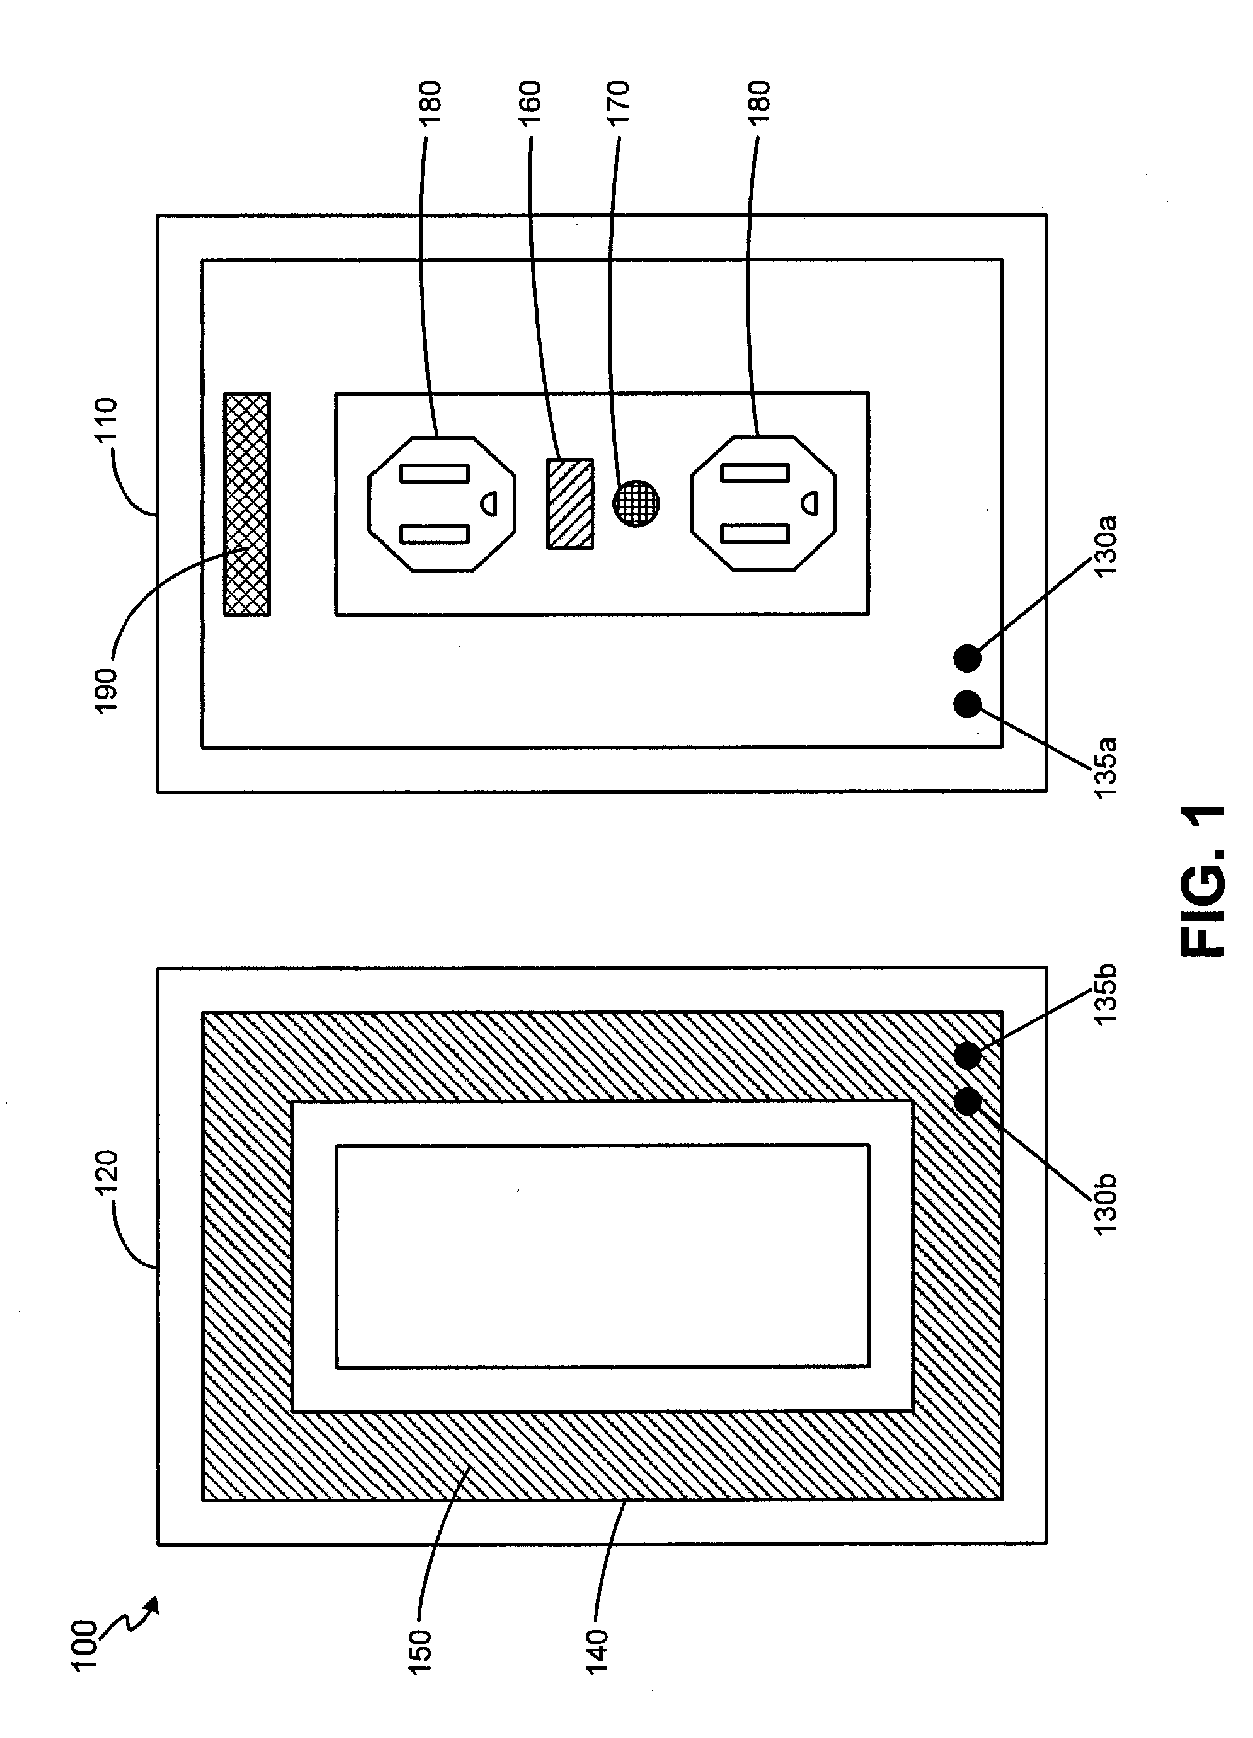 Vapor-emitting device with a solar-powered, active end of use indicator